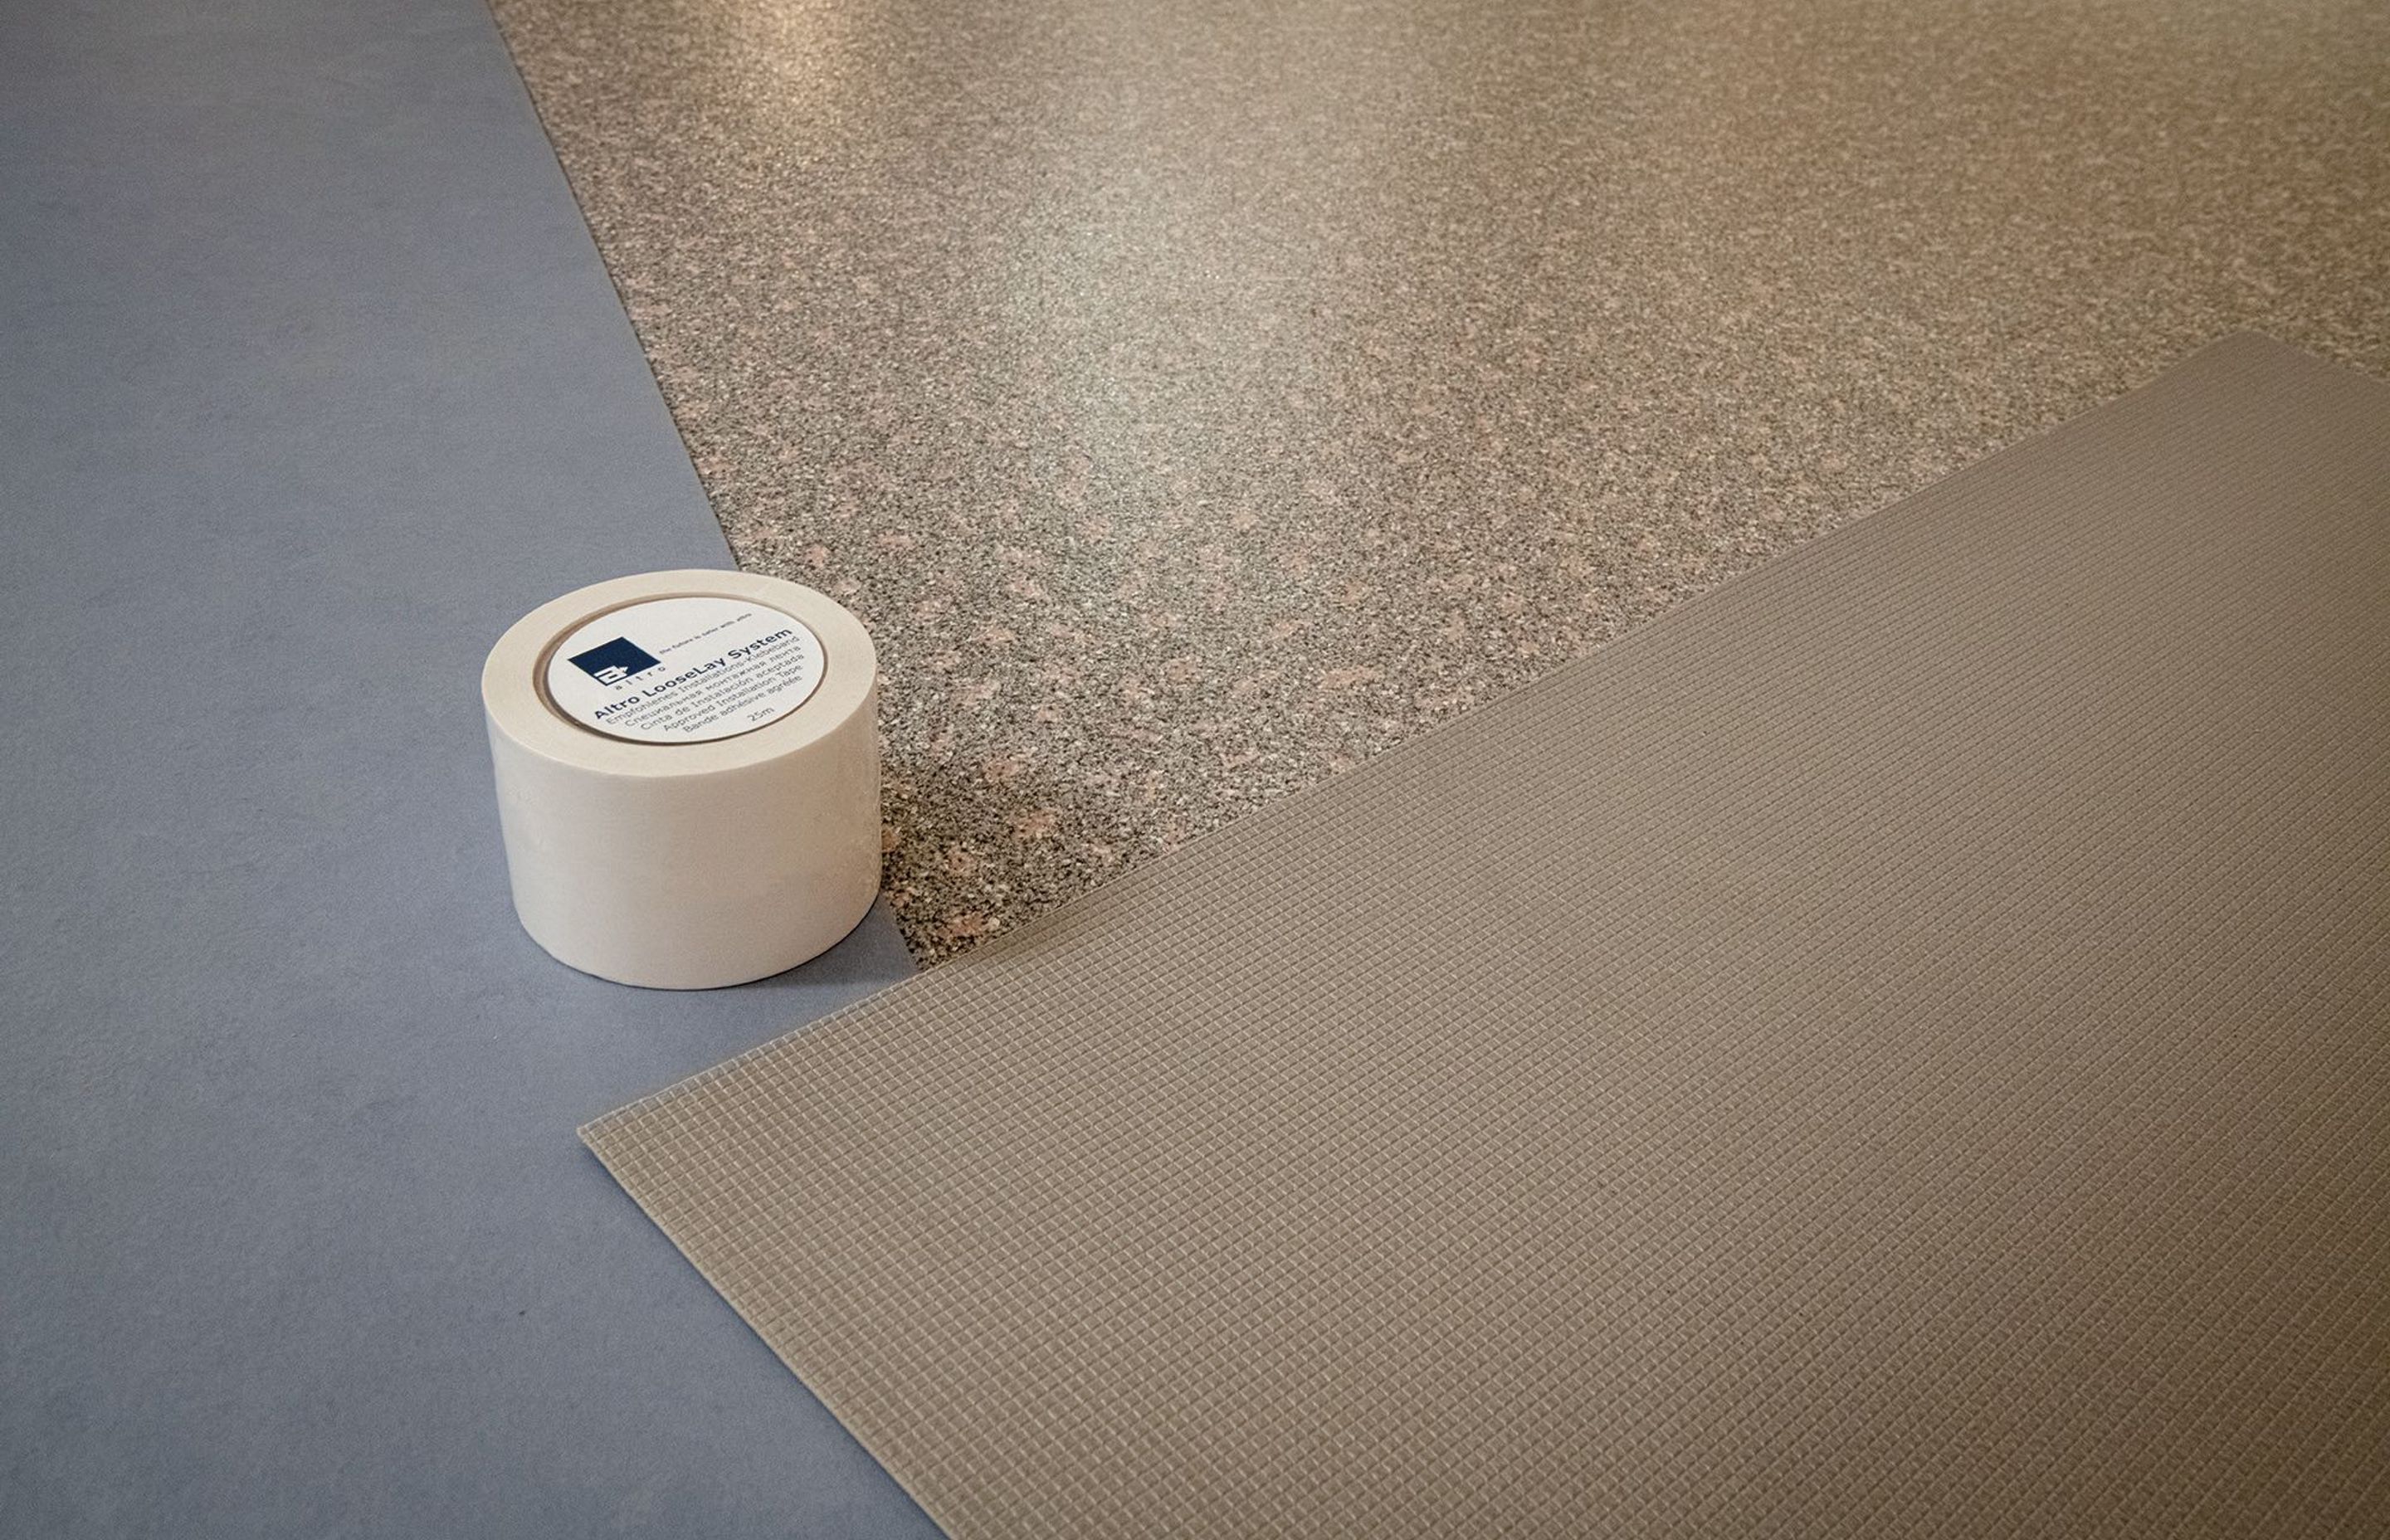 Altro's adhesive-free vinyl flooring is faster and easier to install and remove.